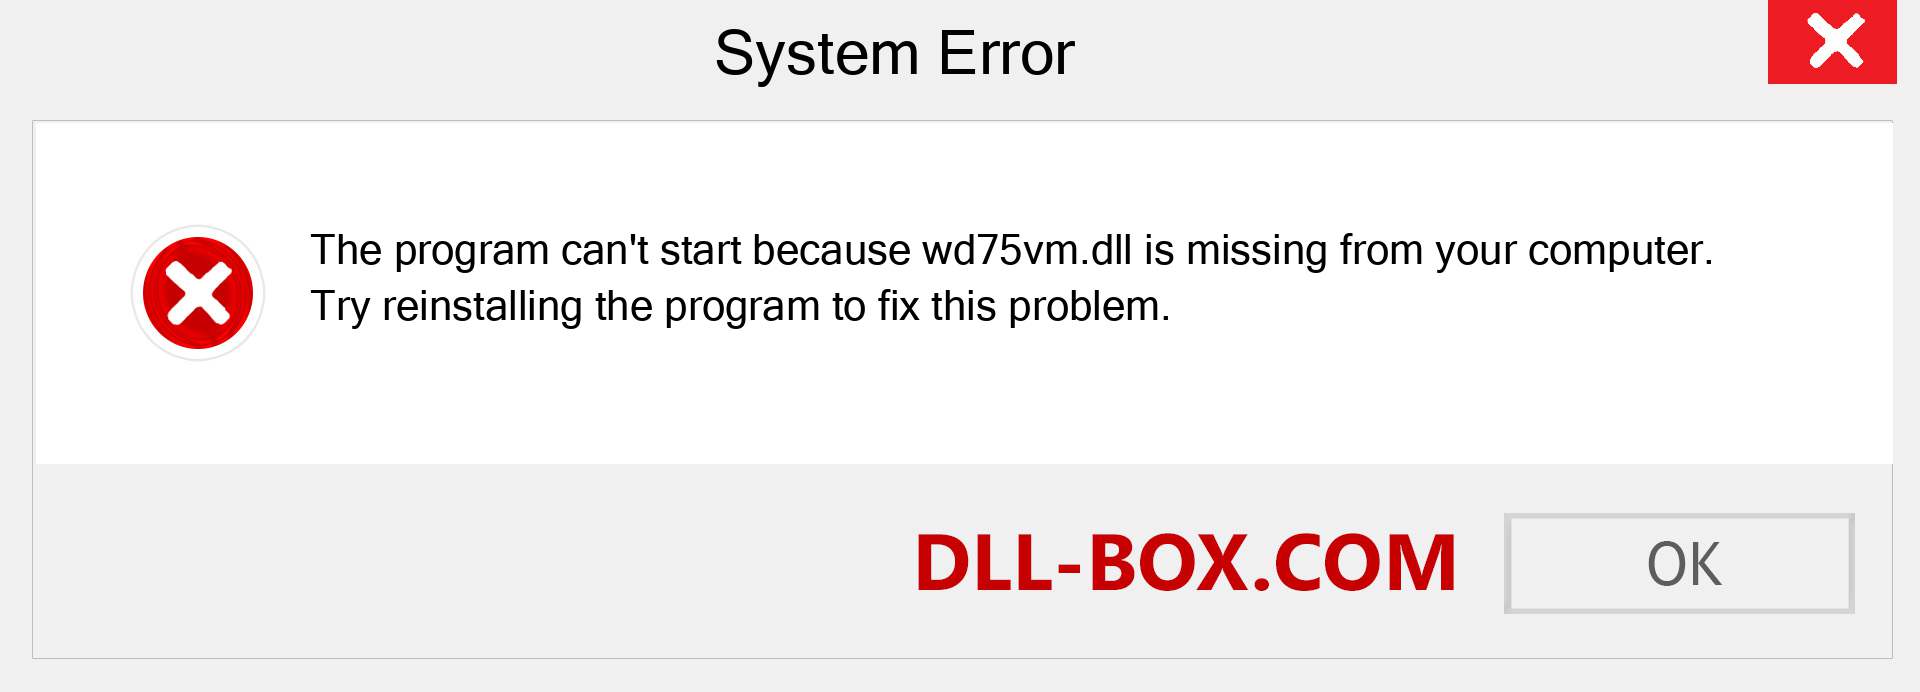  wd75vm.dll file is missing?. Download for Windows 7, 8, 10 - Fix  wd75vm dll Missing Error on Windows, photos, images